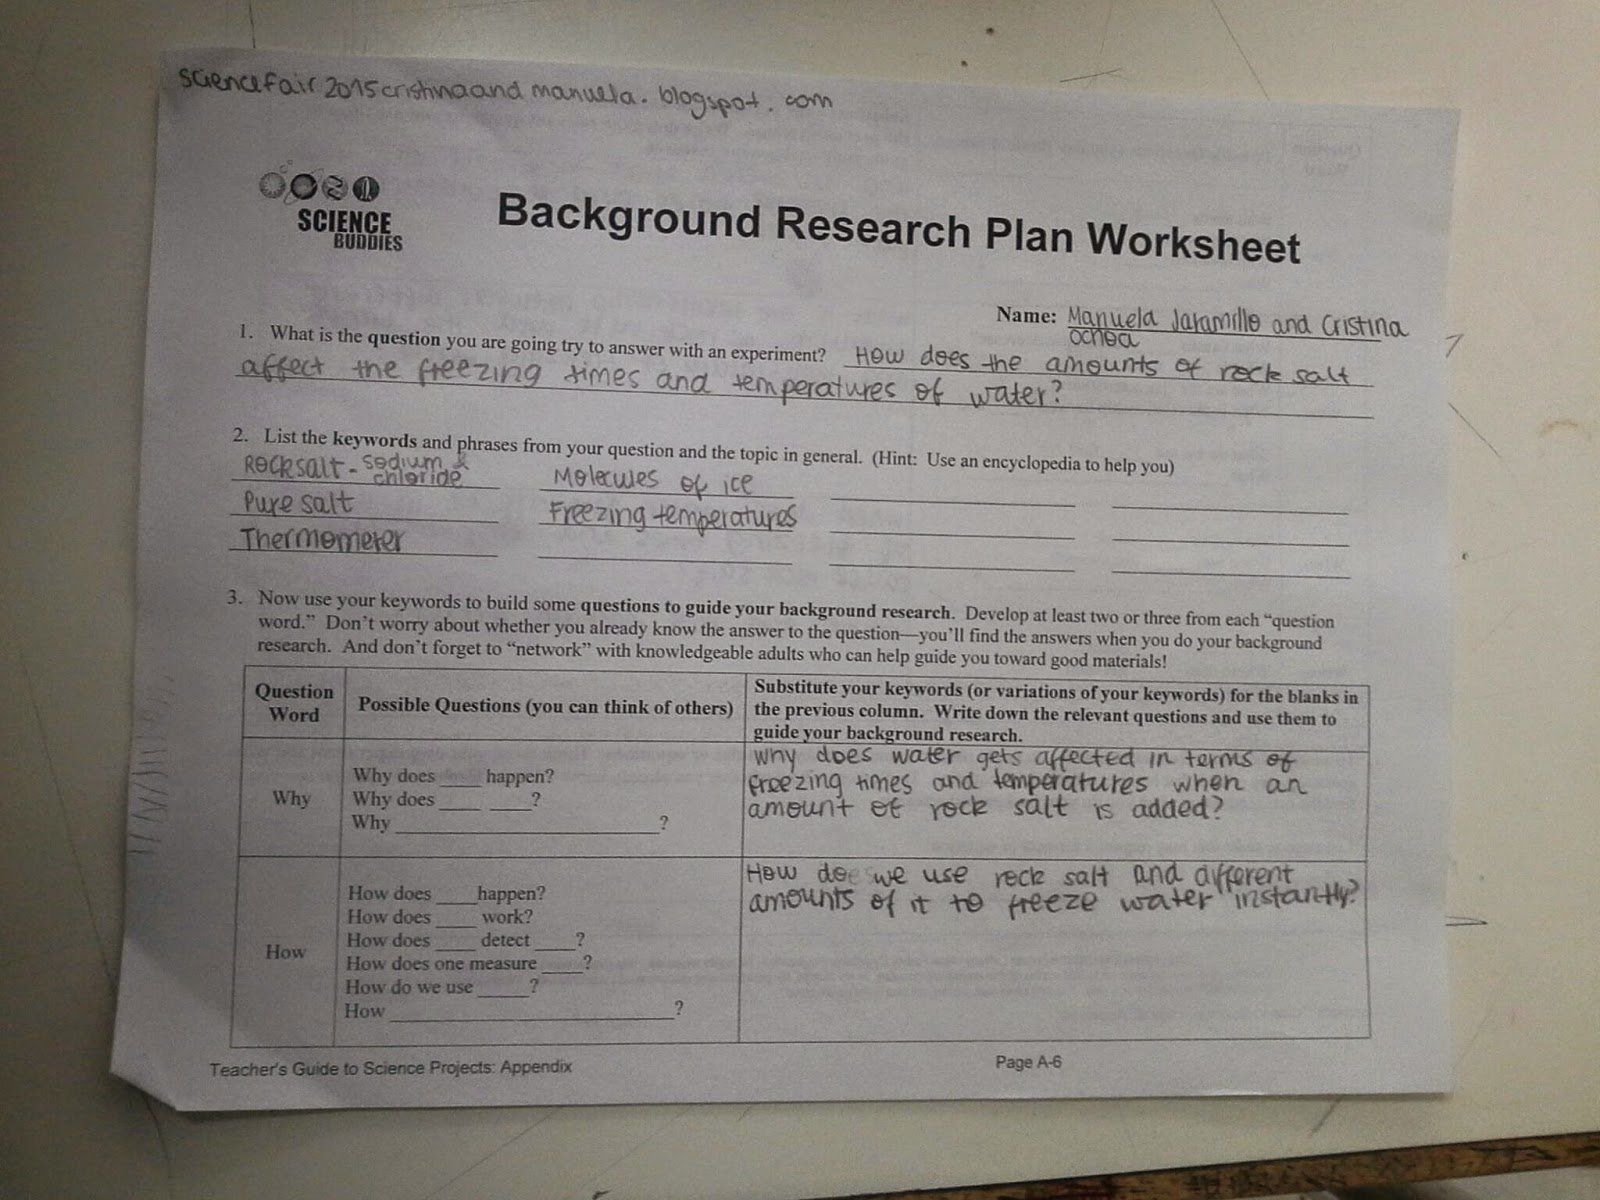 Science Fair 2015 Cristina And Manuela 63 Background Research For Background Research Plan Worksheet